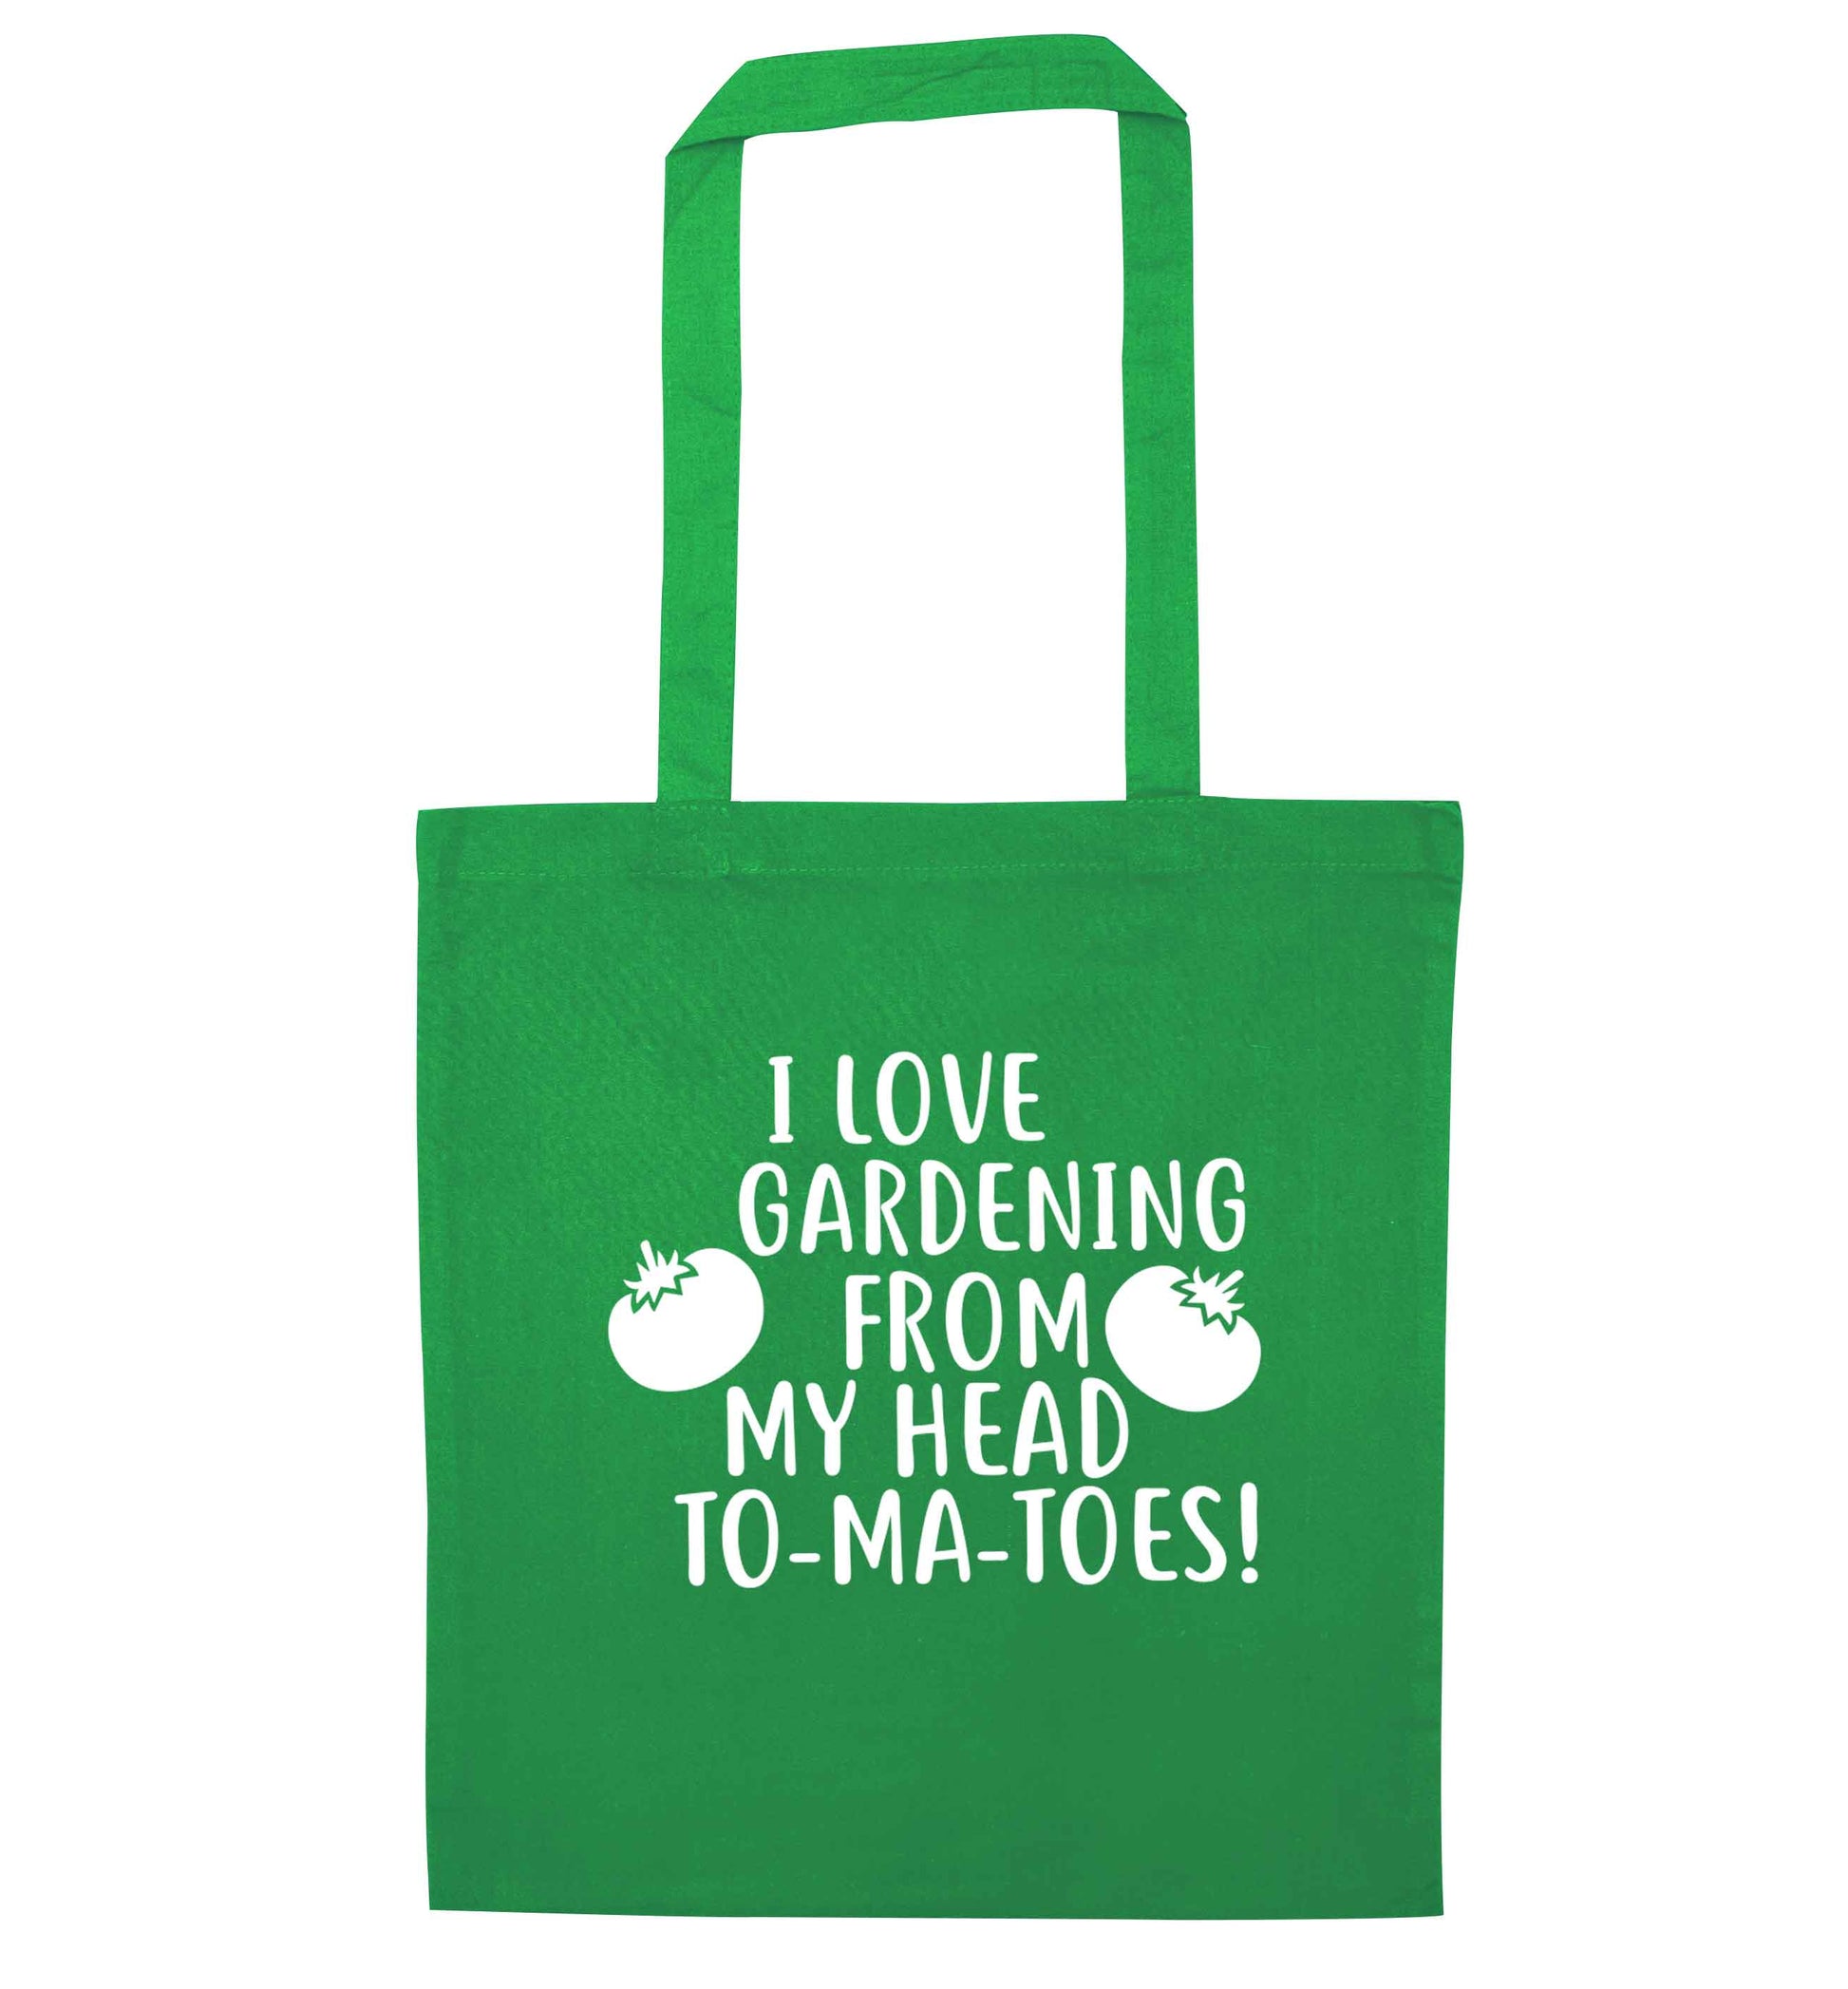 I love gardening from my head to-ma-toes green tote bag